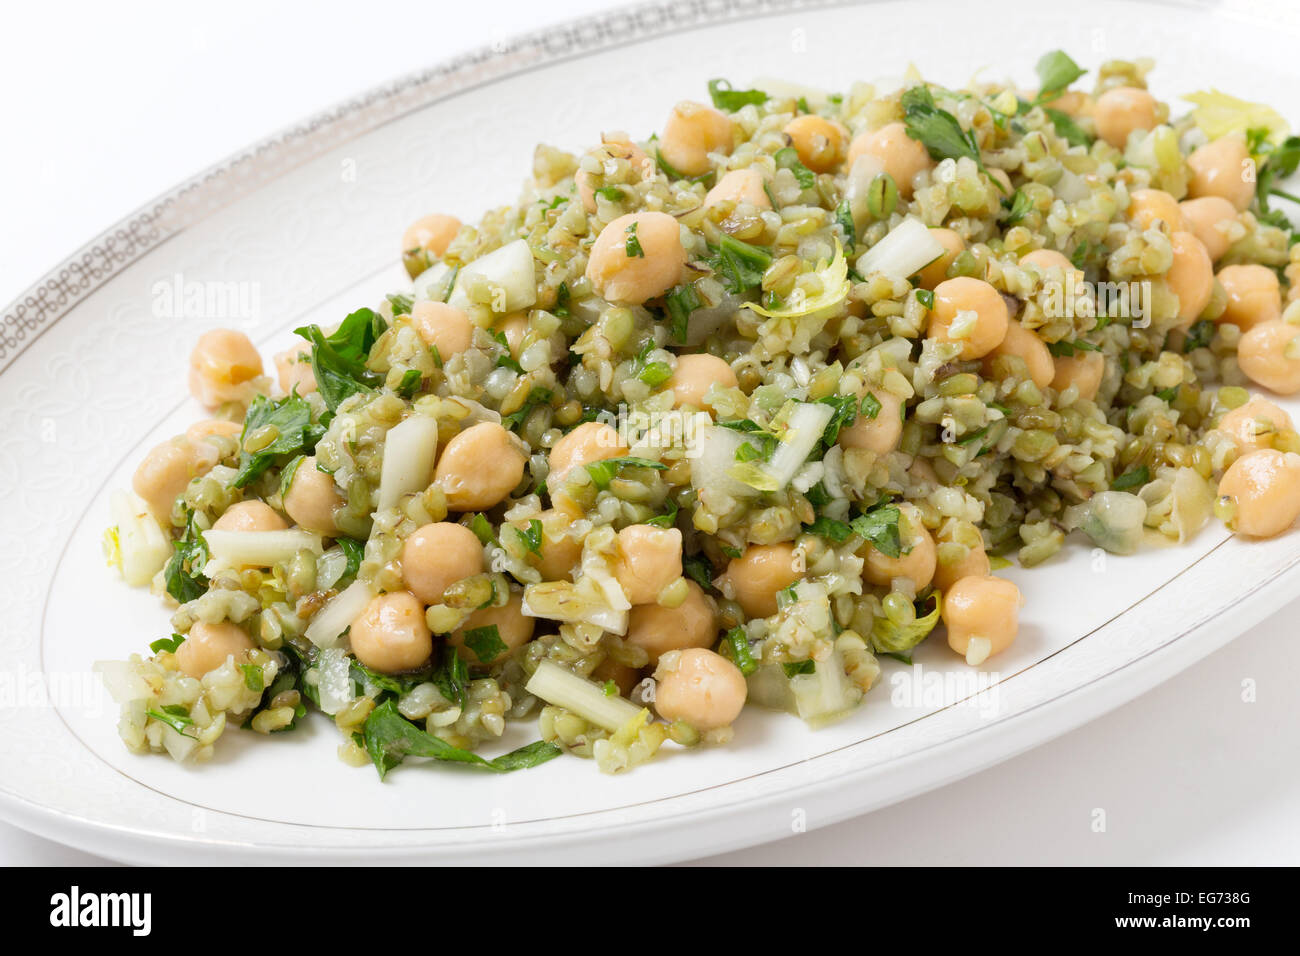 Freekeh salad with chickpeas, onion, parsley, celery, and a lemon juice and olive oil dressing Stock Photo